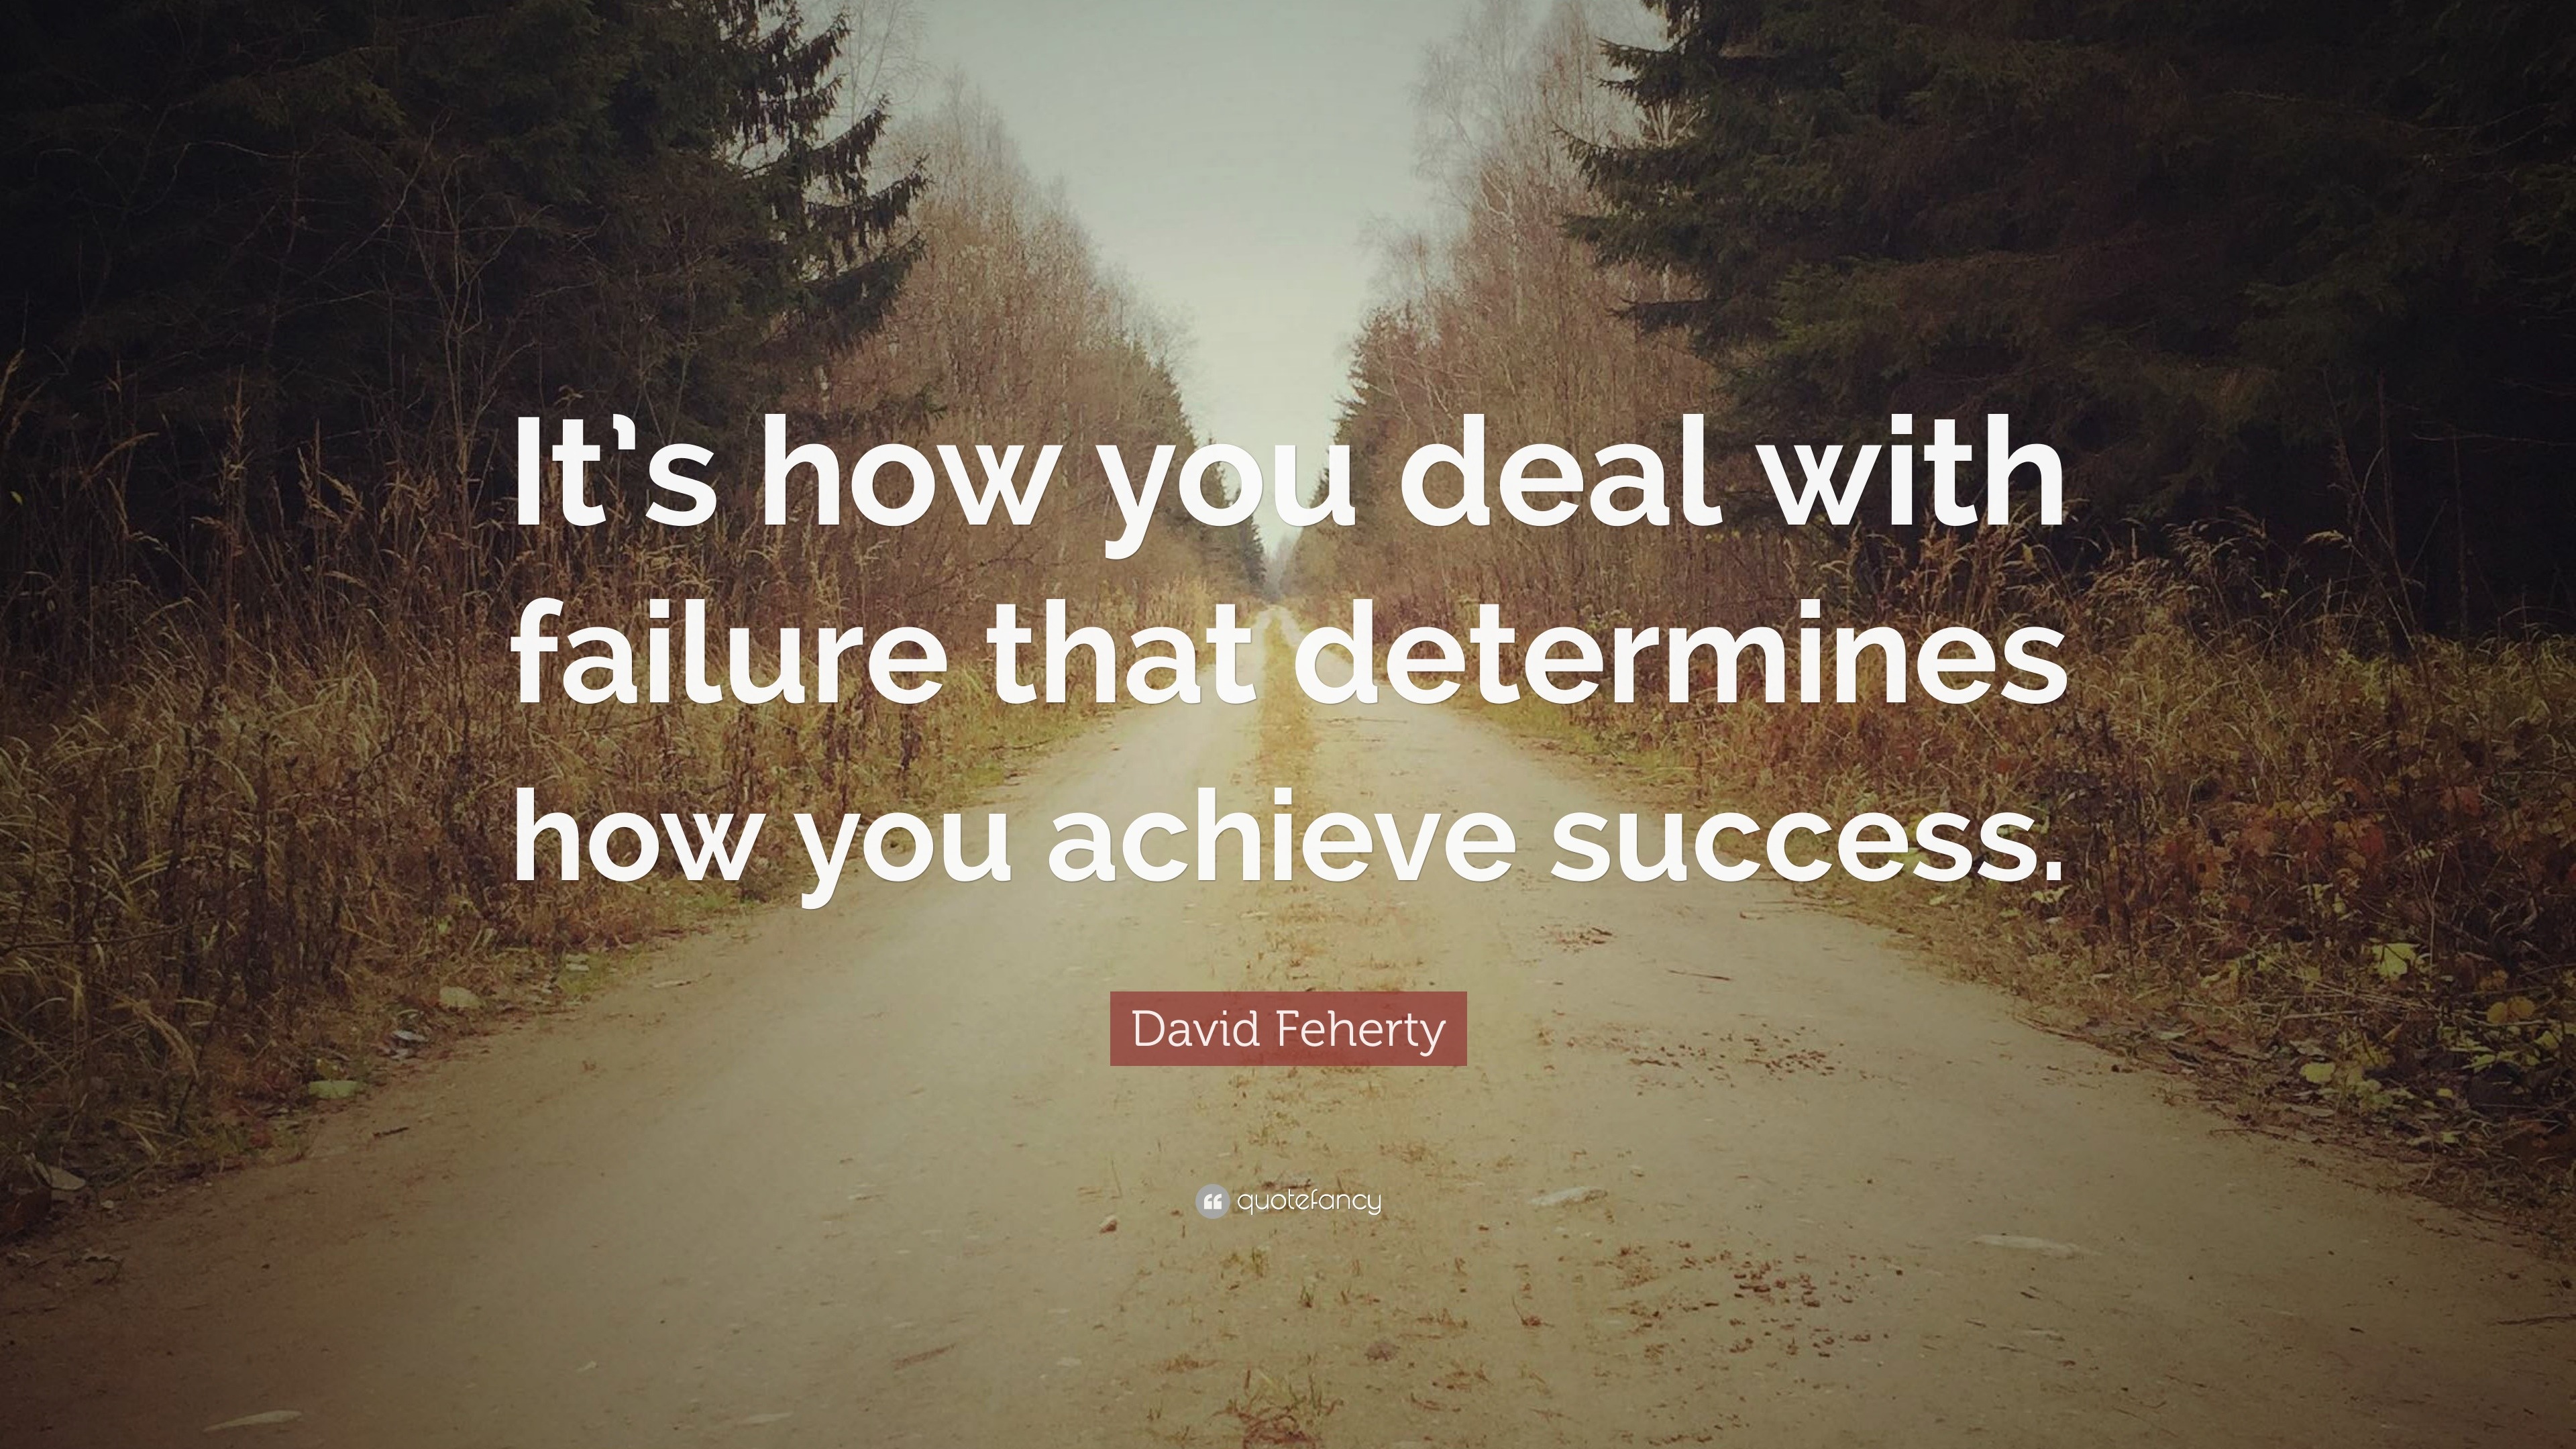 David Feherty Quote: “It’s how you deal with failure that determines ...